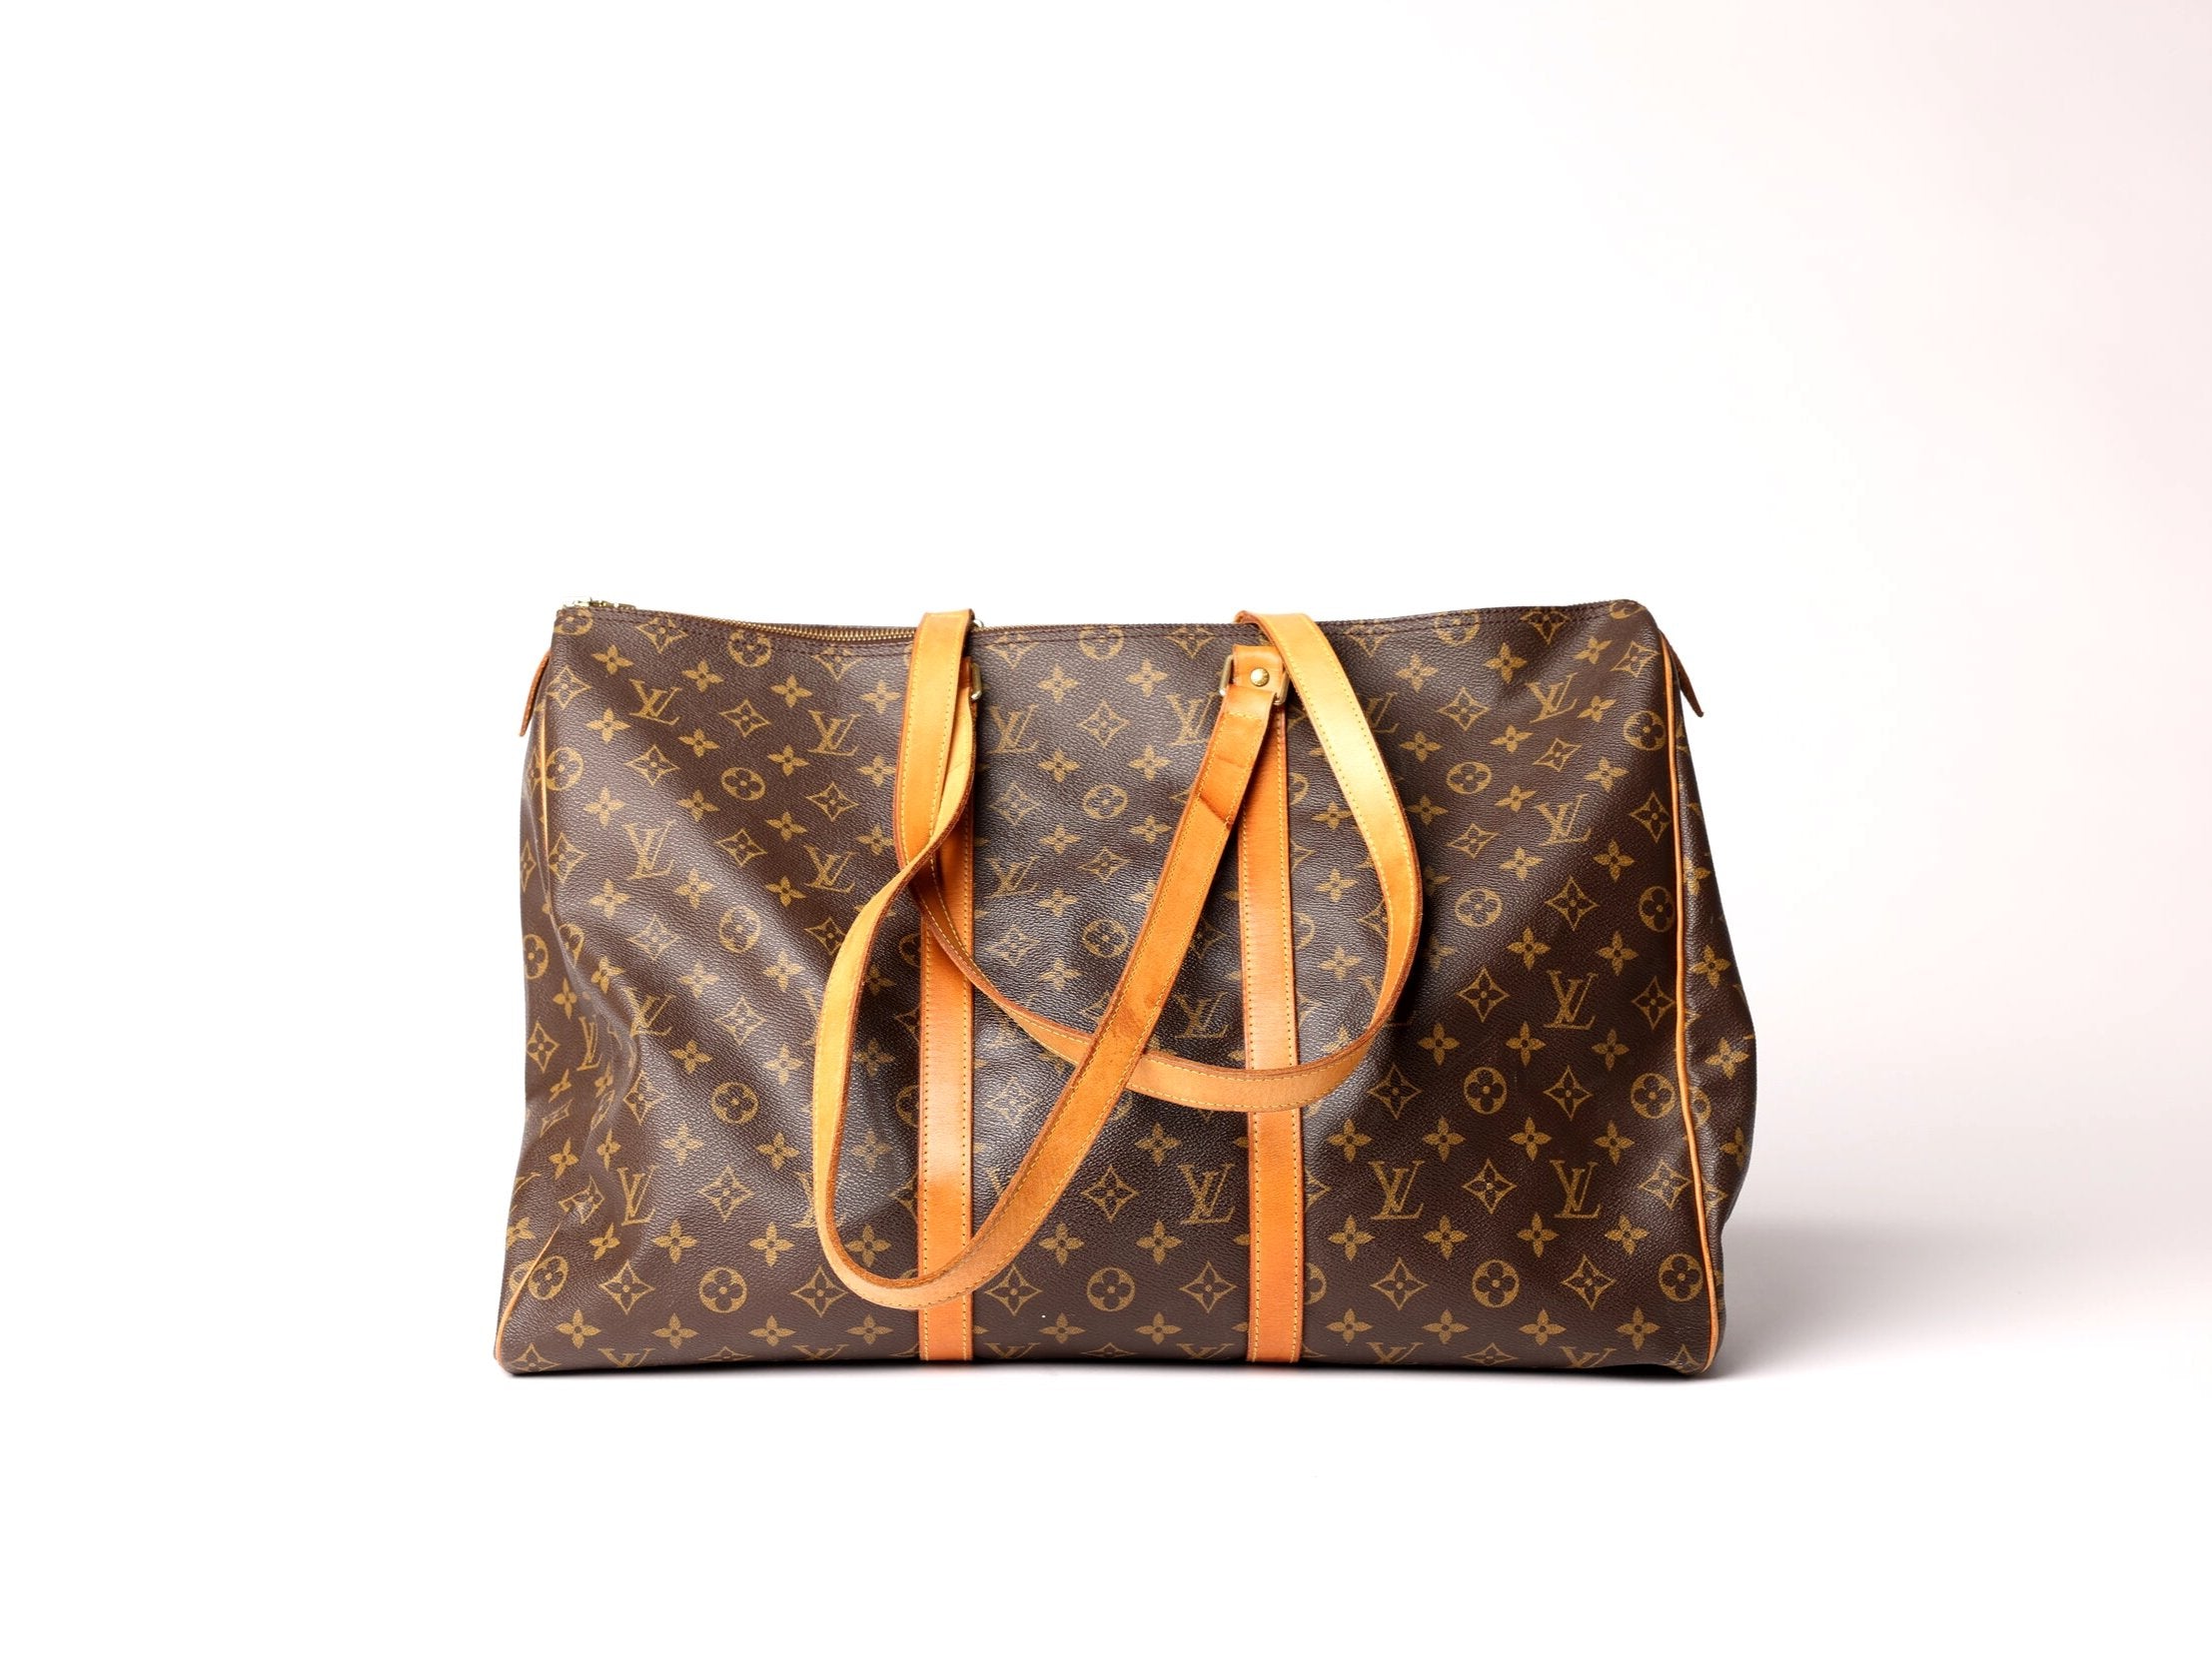 LOUIS VUITTON  Monogram Canvas Keepall Duffle Bag – The Vault By Volpe  Beringer